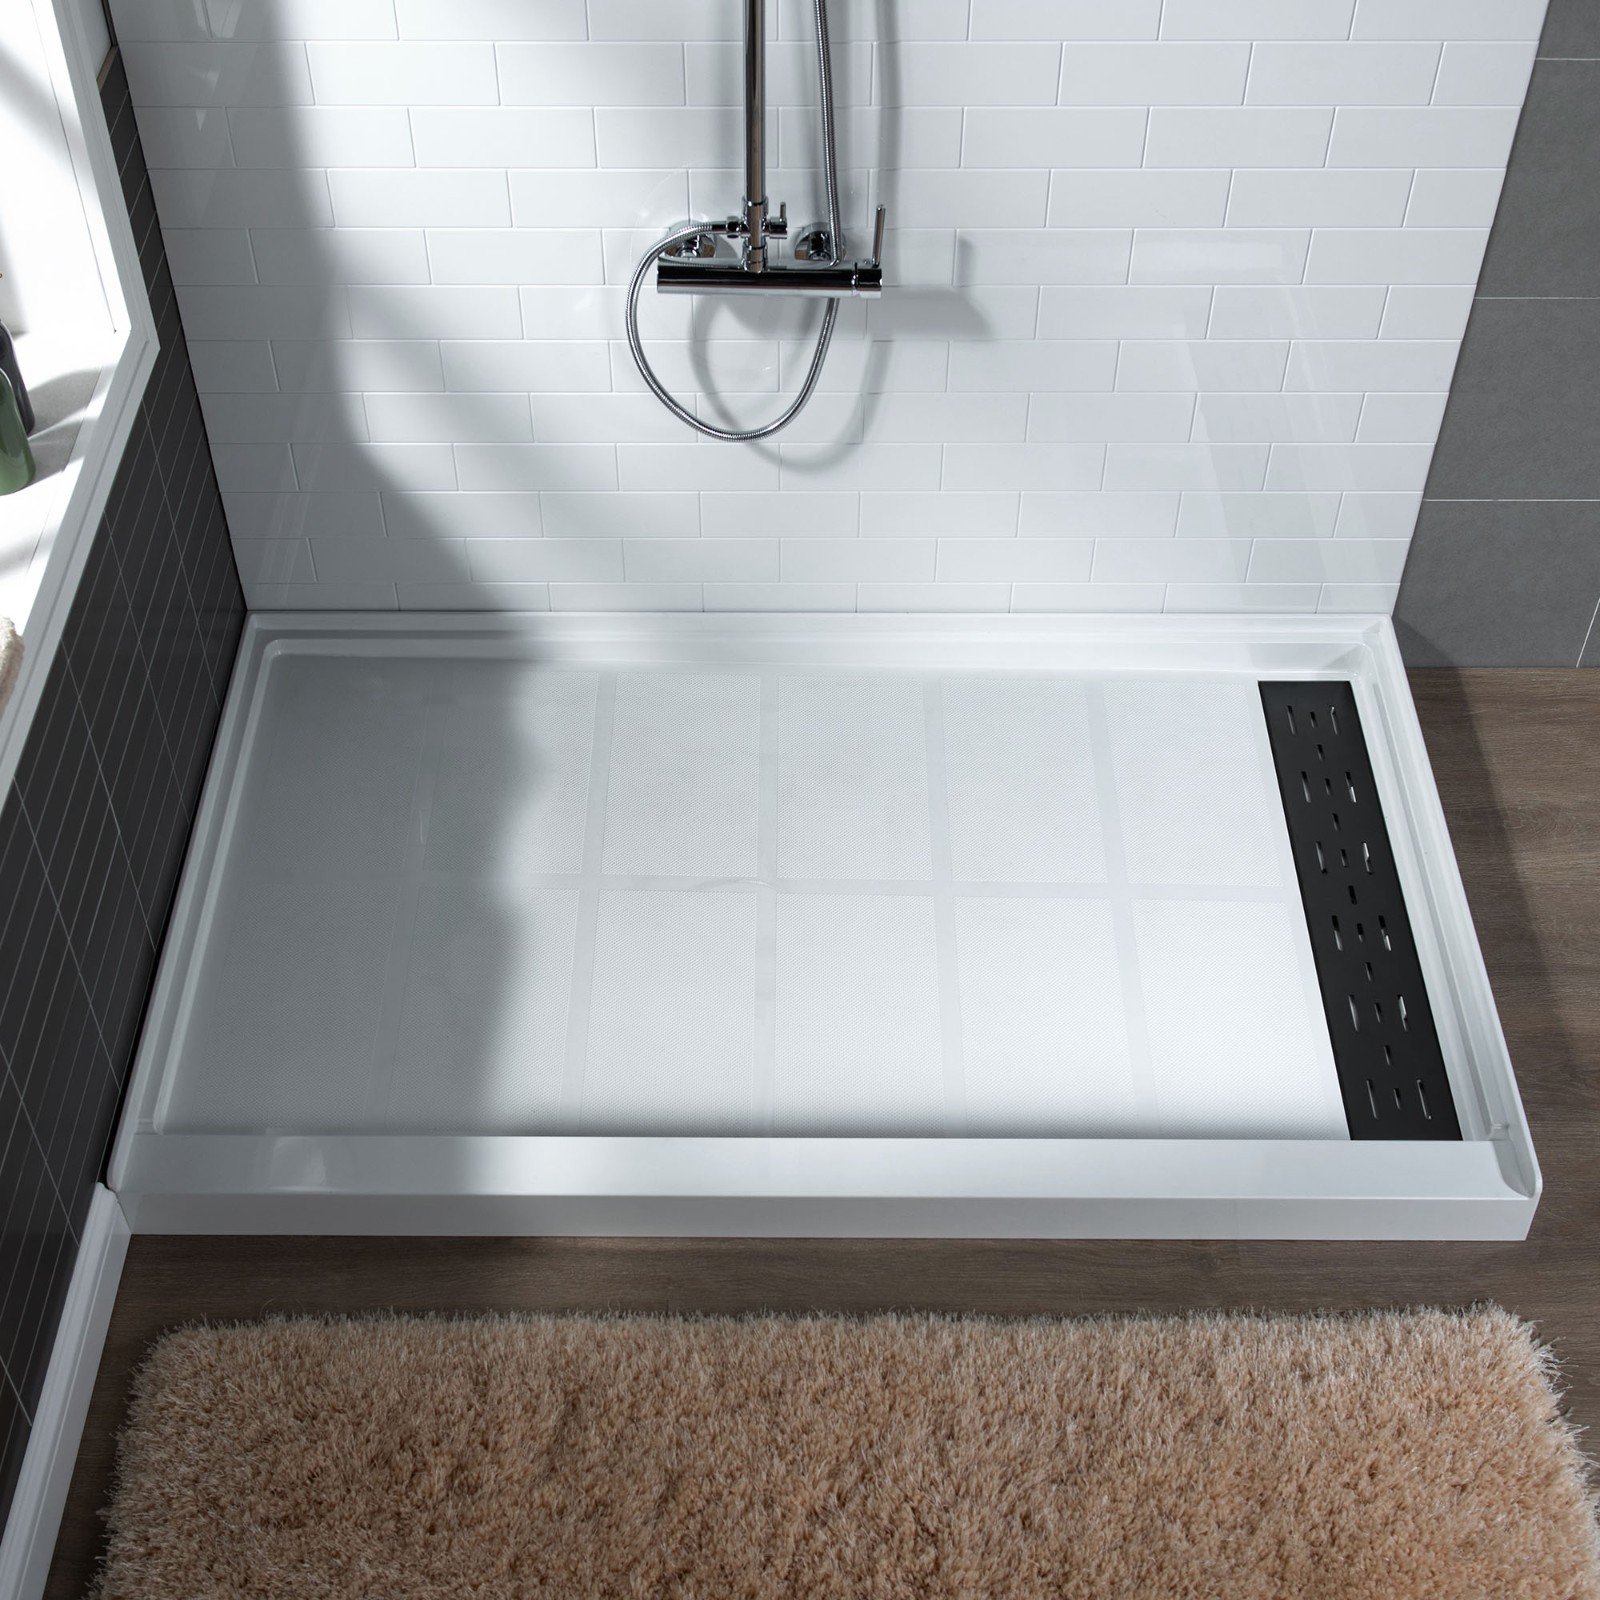  WOODBRIDGE SBR4832-1000R-MB SolidSurface Shower Base with Recessed Trench Side Including Matte Black Linear Cover, 48